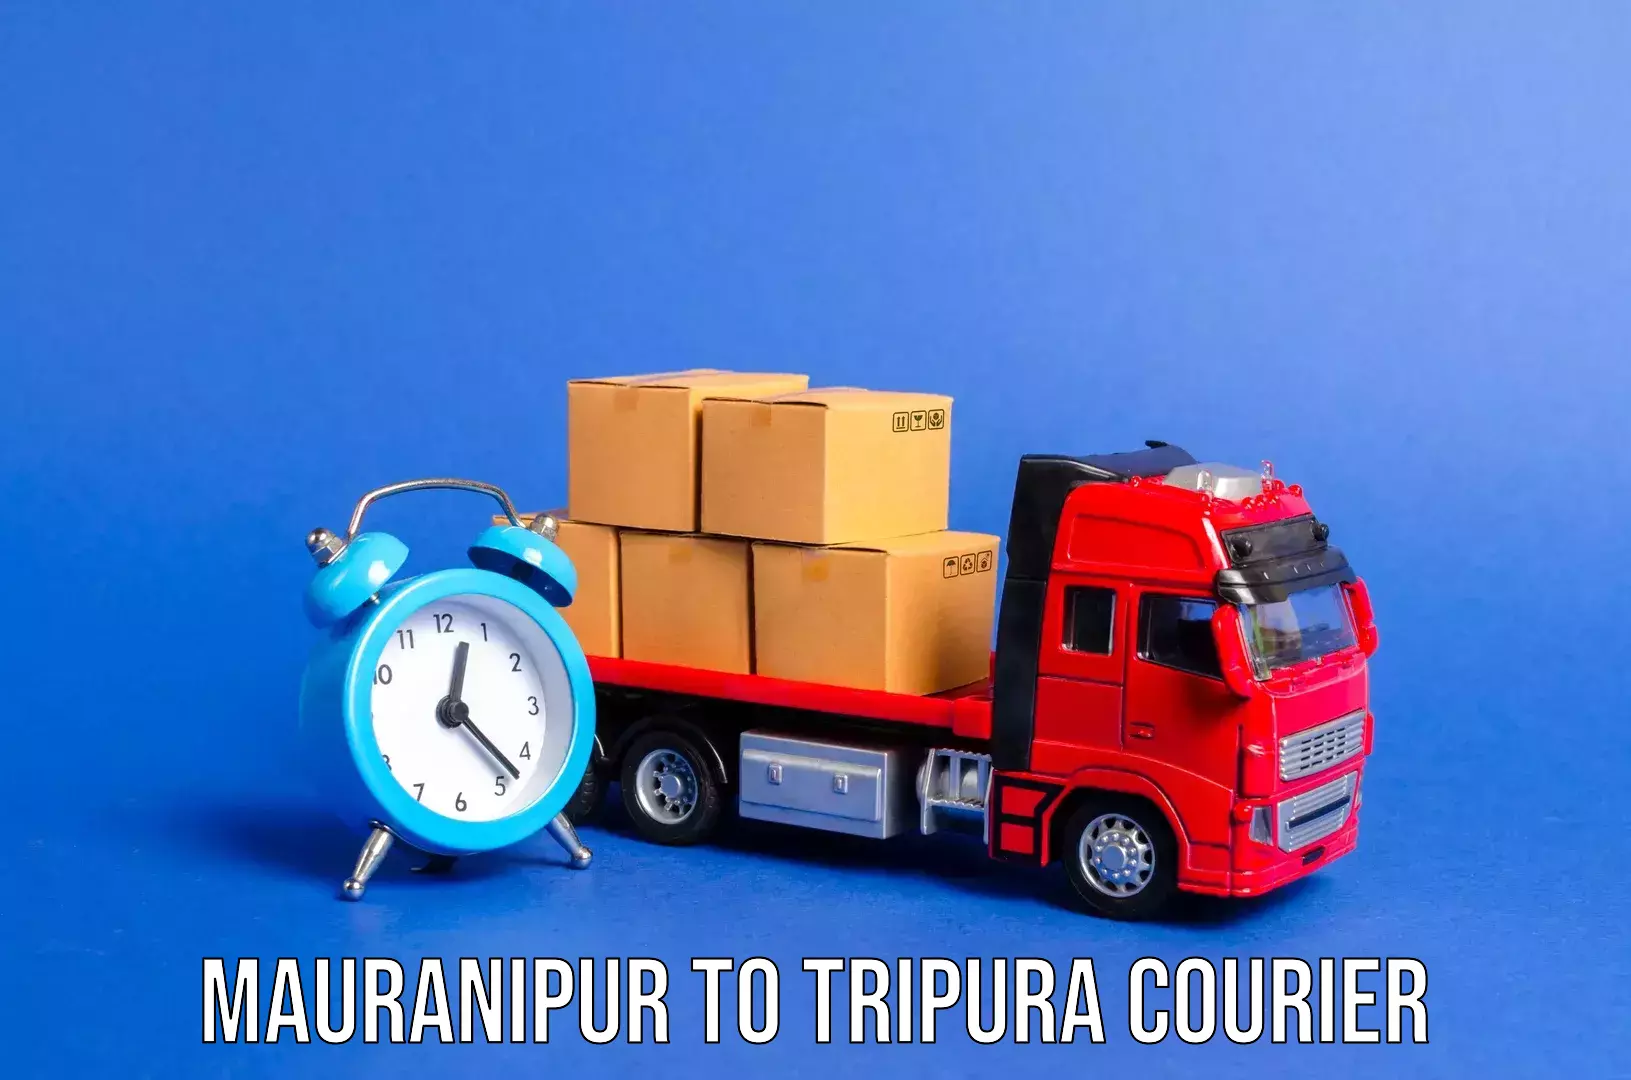 Luggage transport consulting Mauranipur to North Tripura